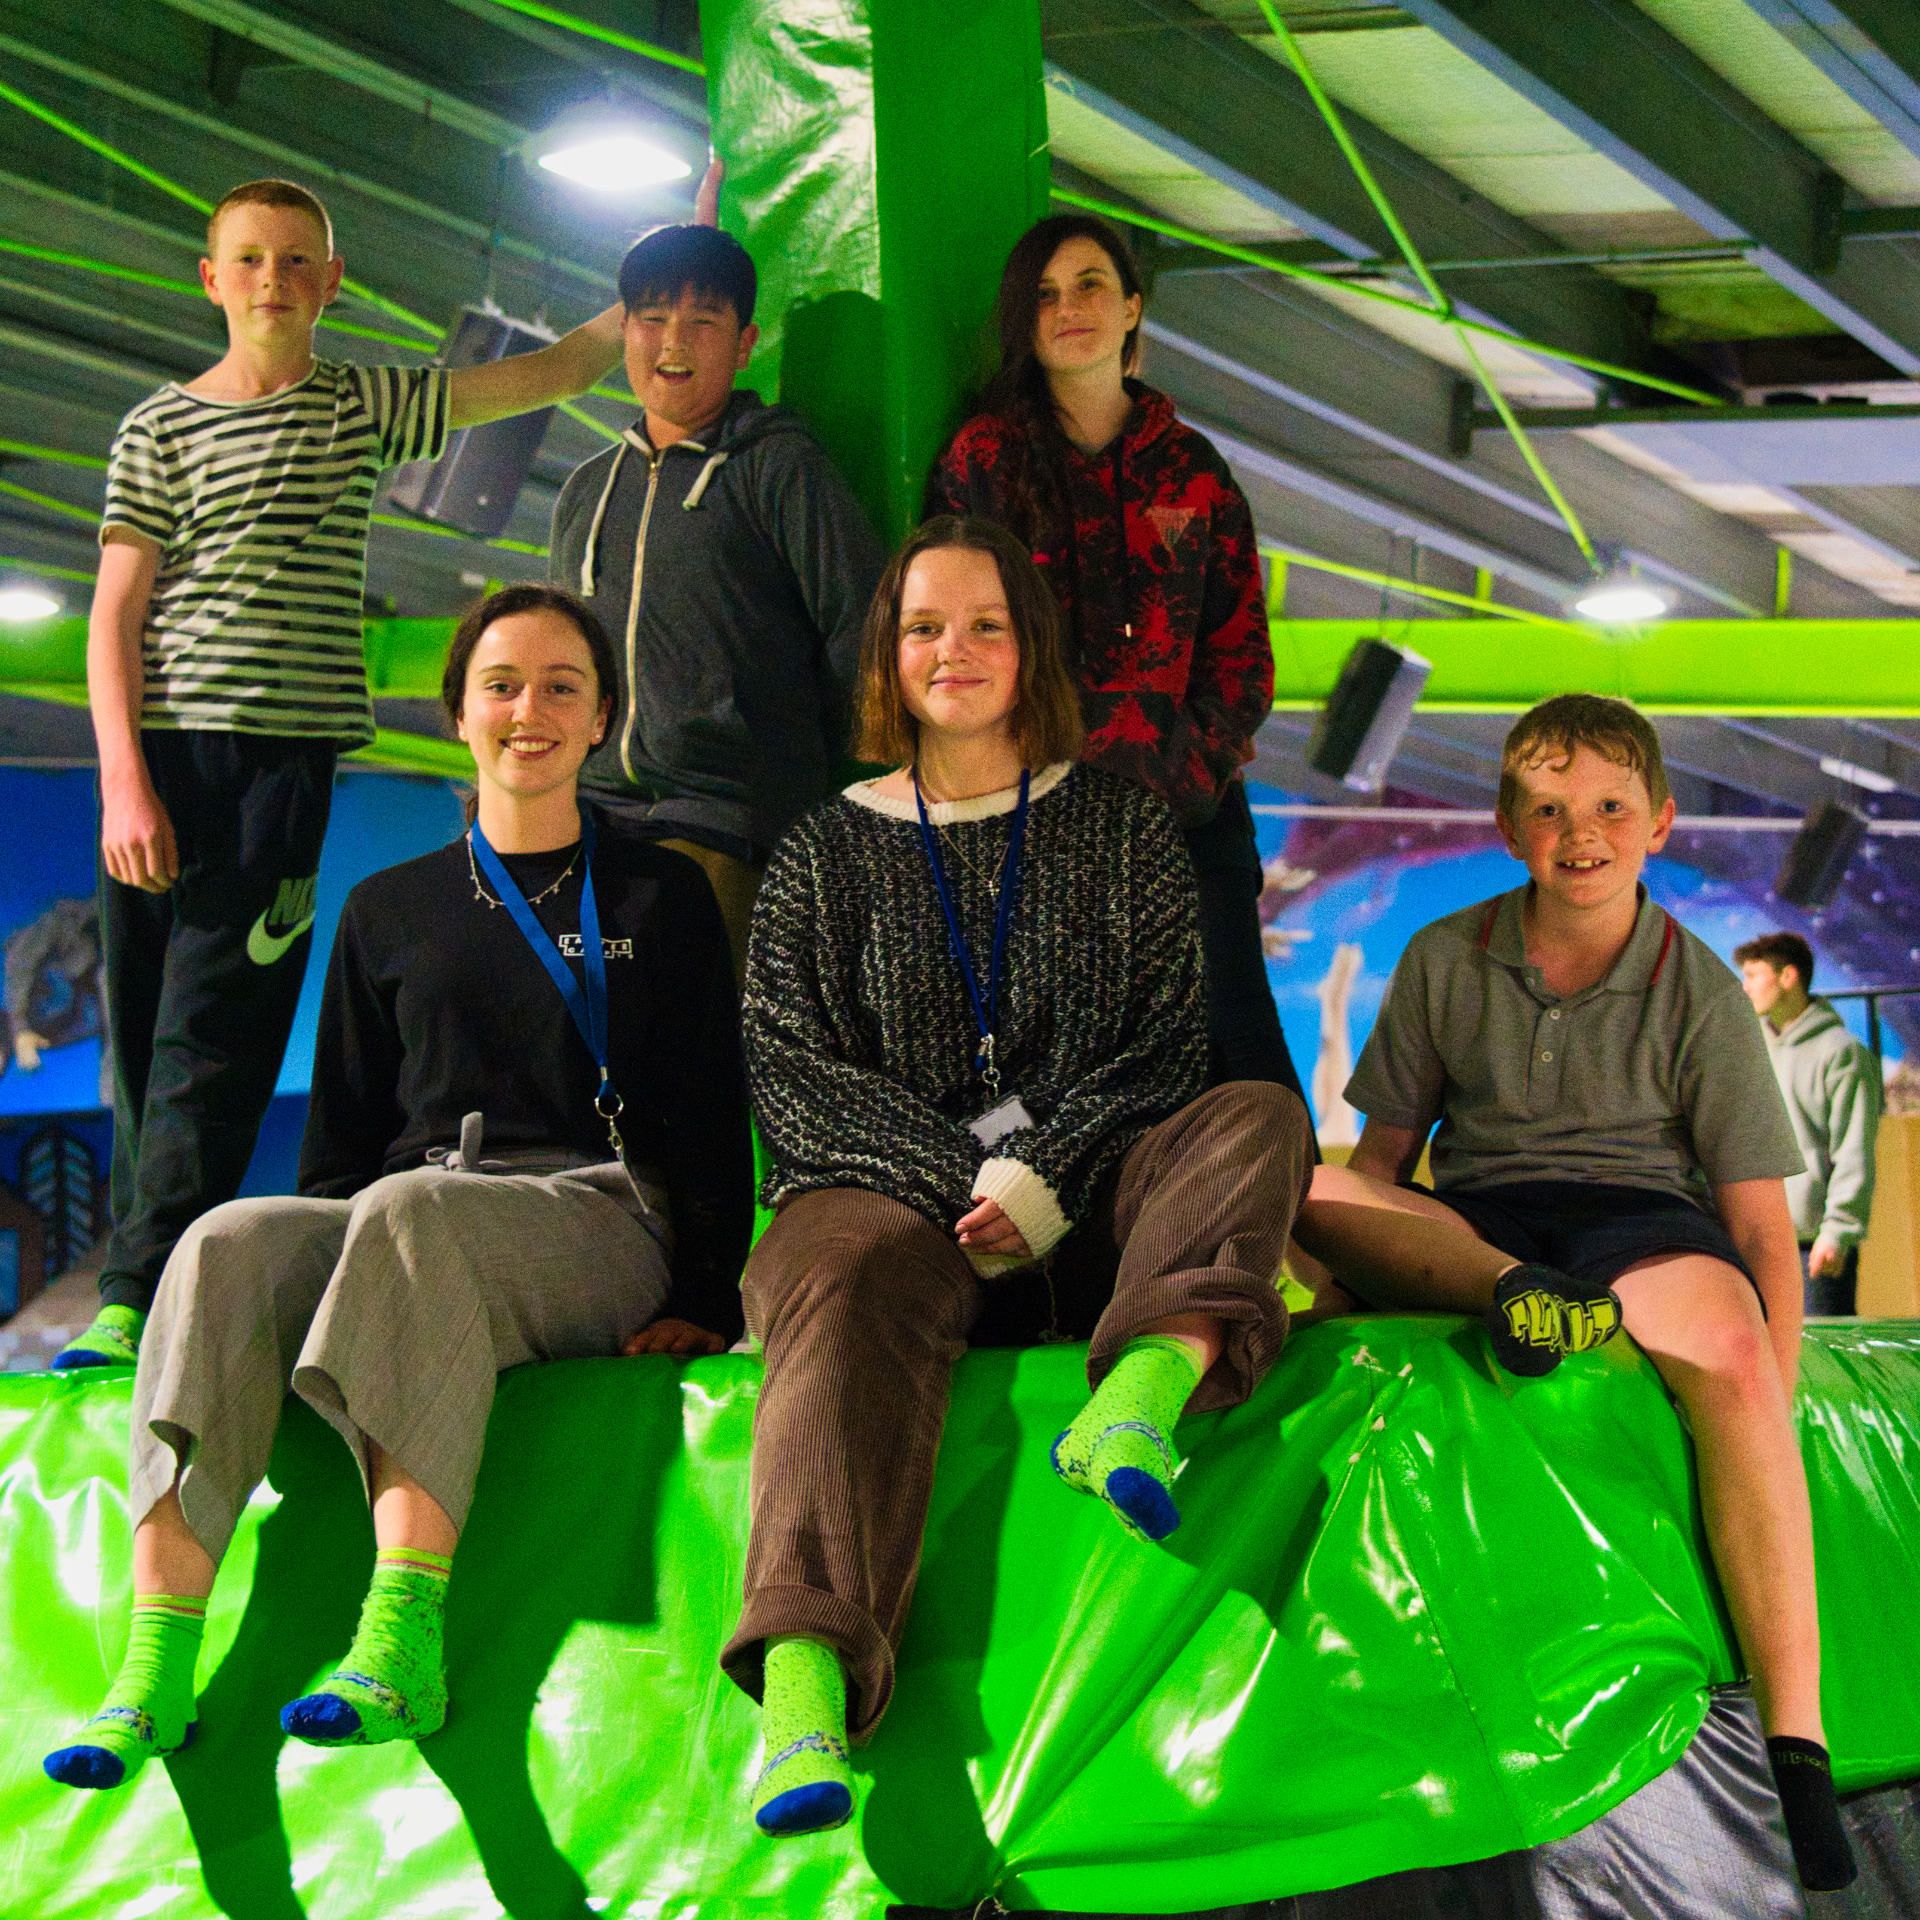 A group of young people sitting in a Trampoline Arena